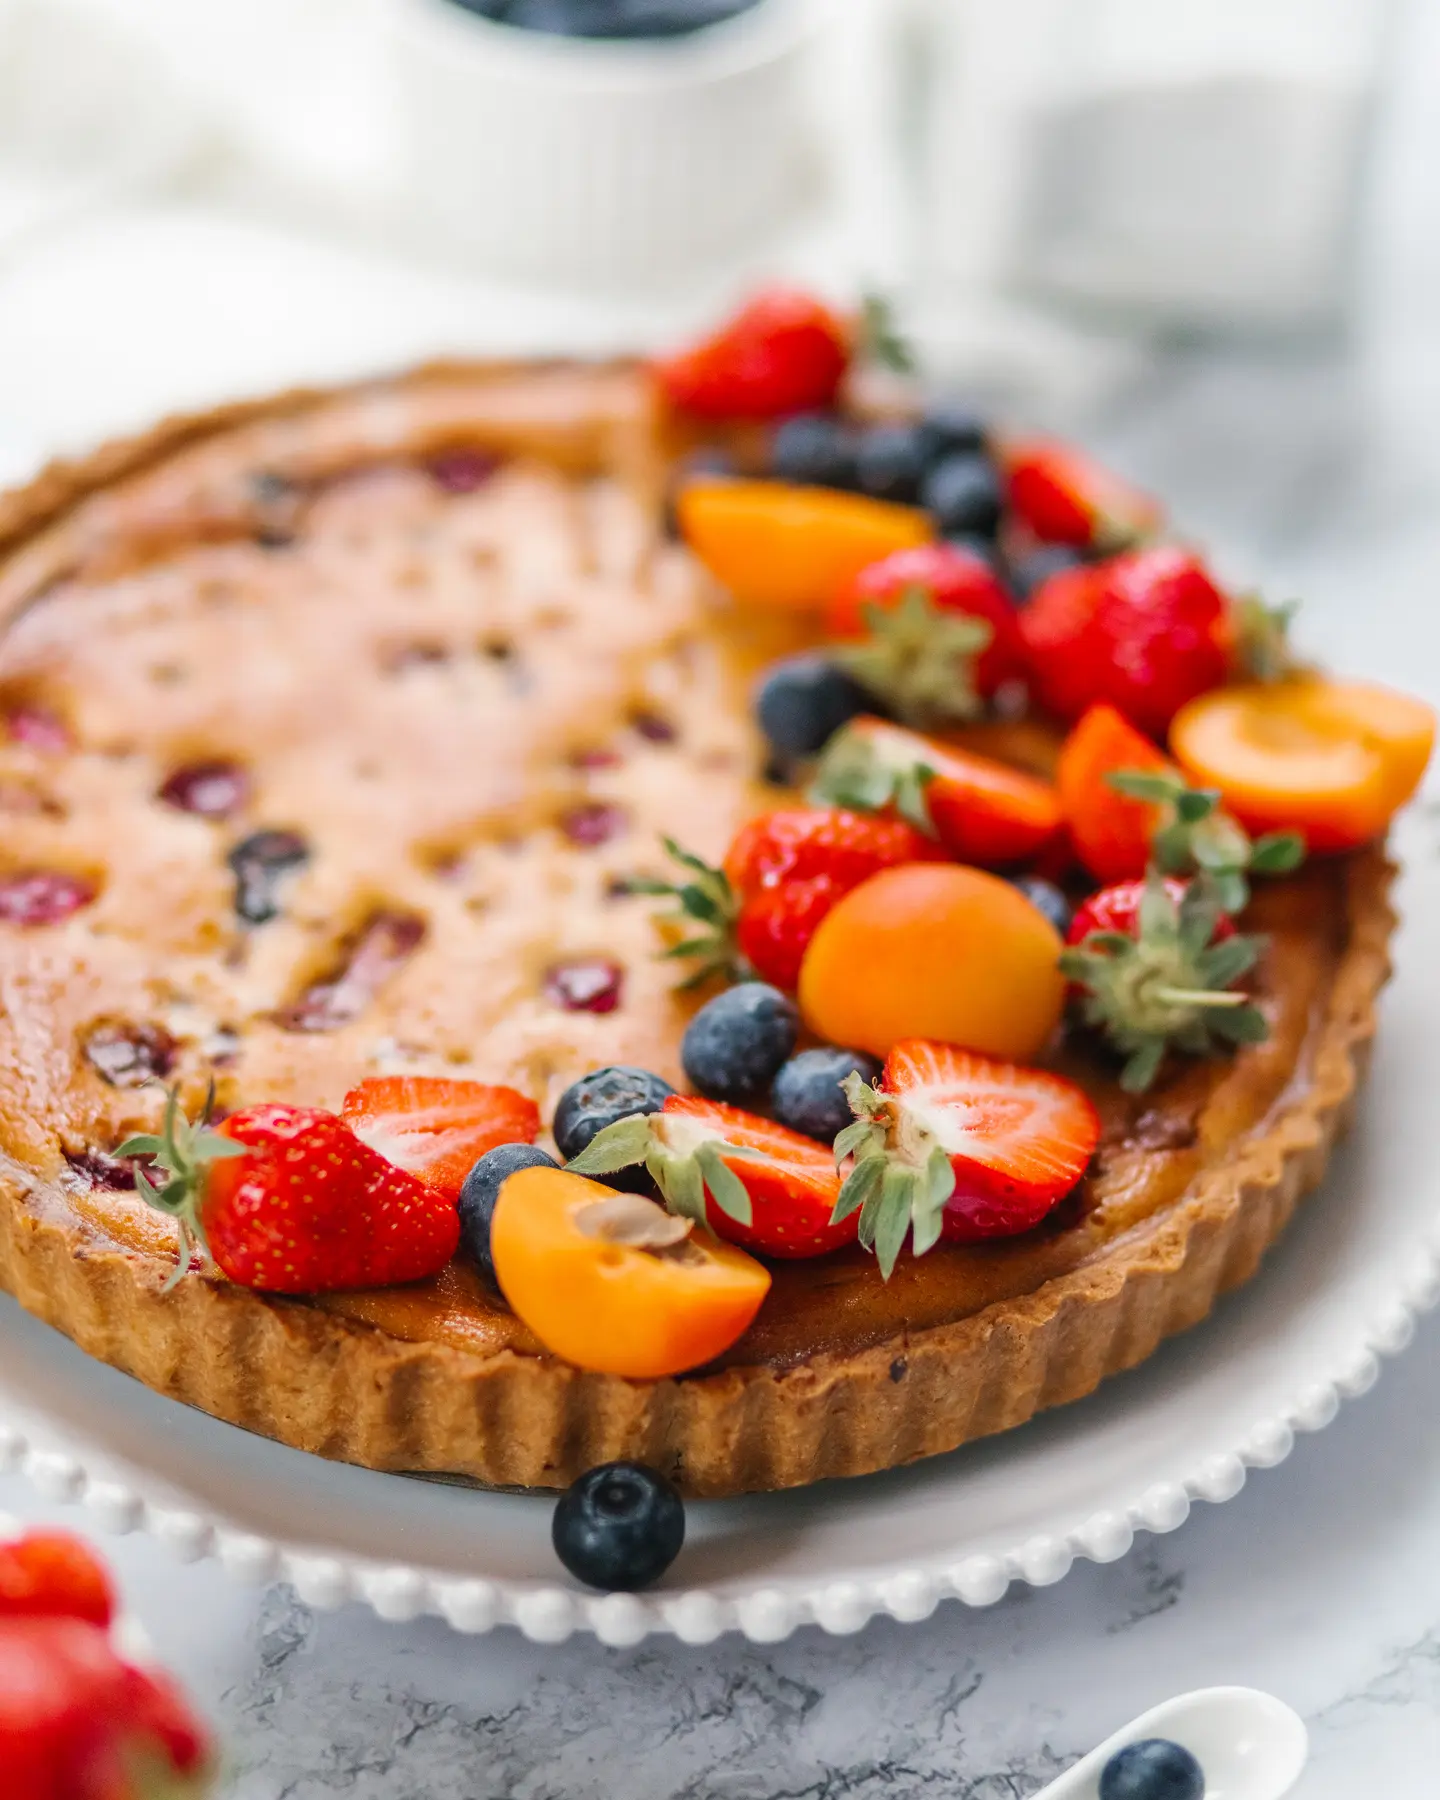 A round pie with berries is on the table. A round pie with berries is on the table. It has a golden brown crust. The pie is decorated with berries.